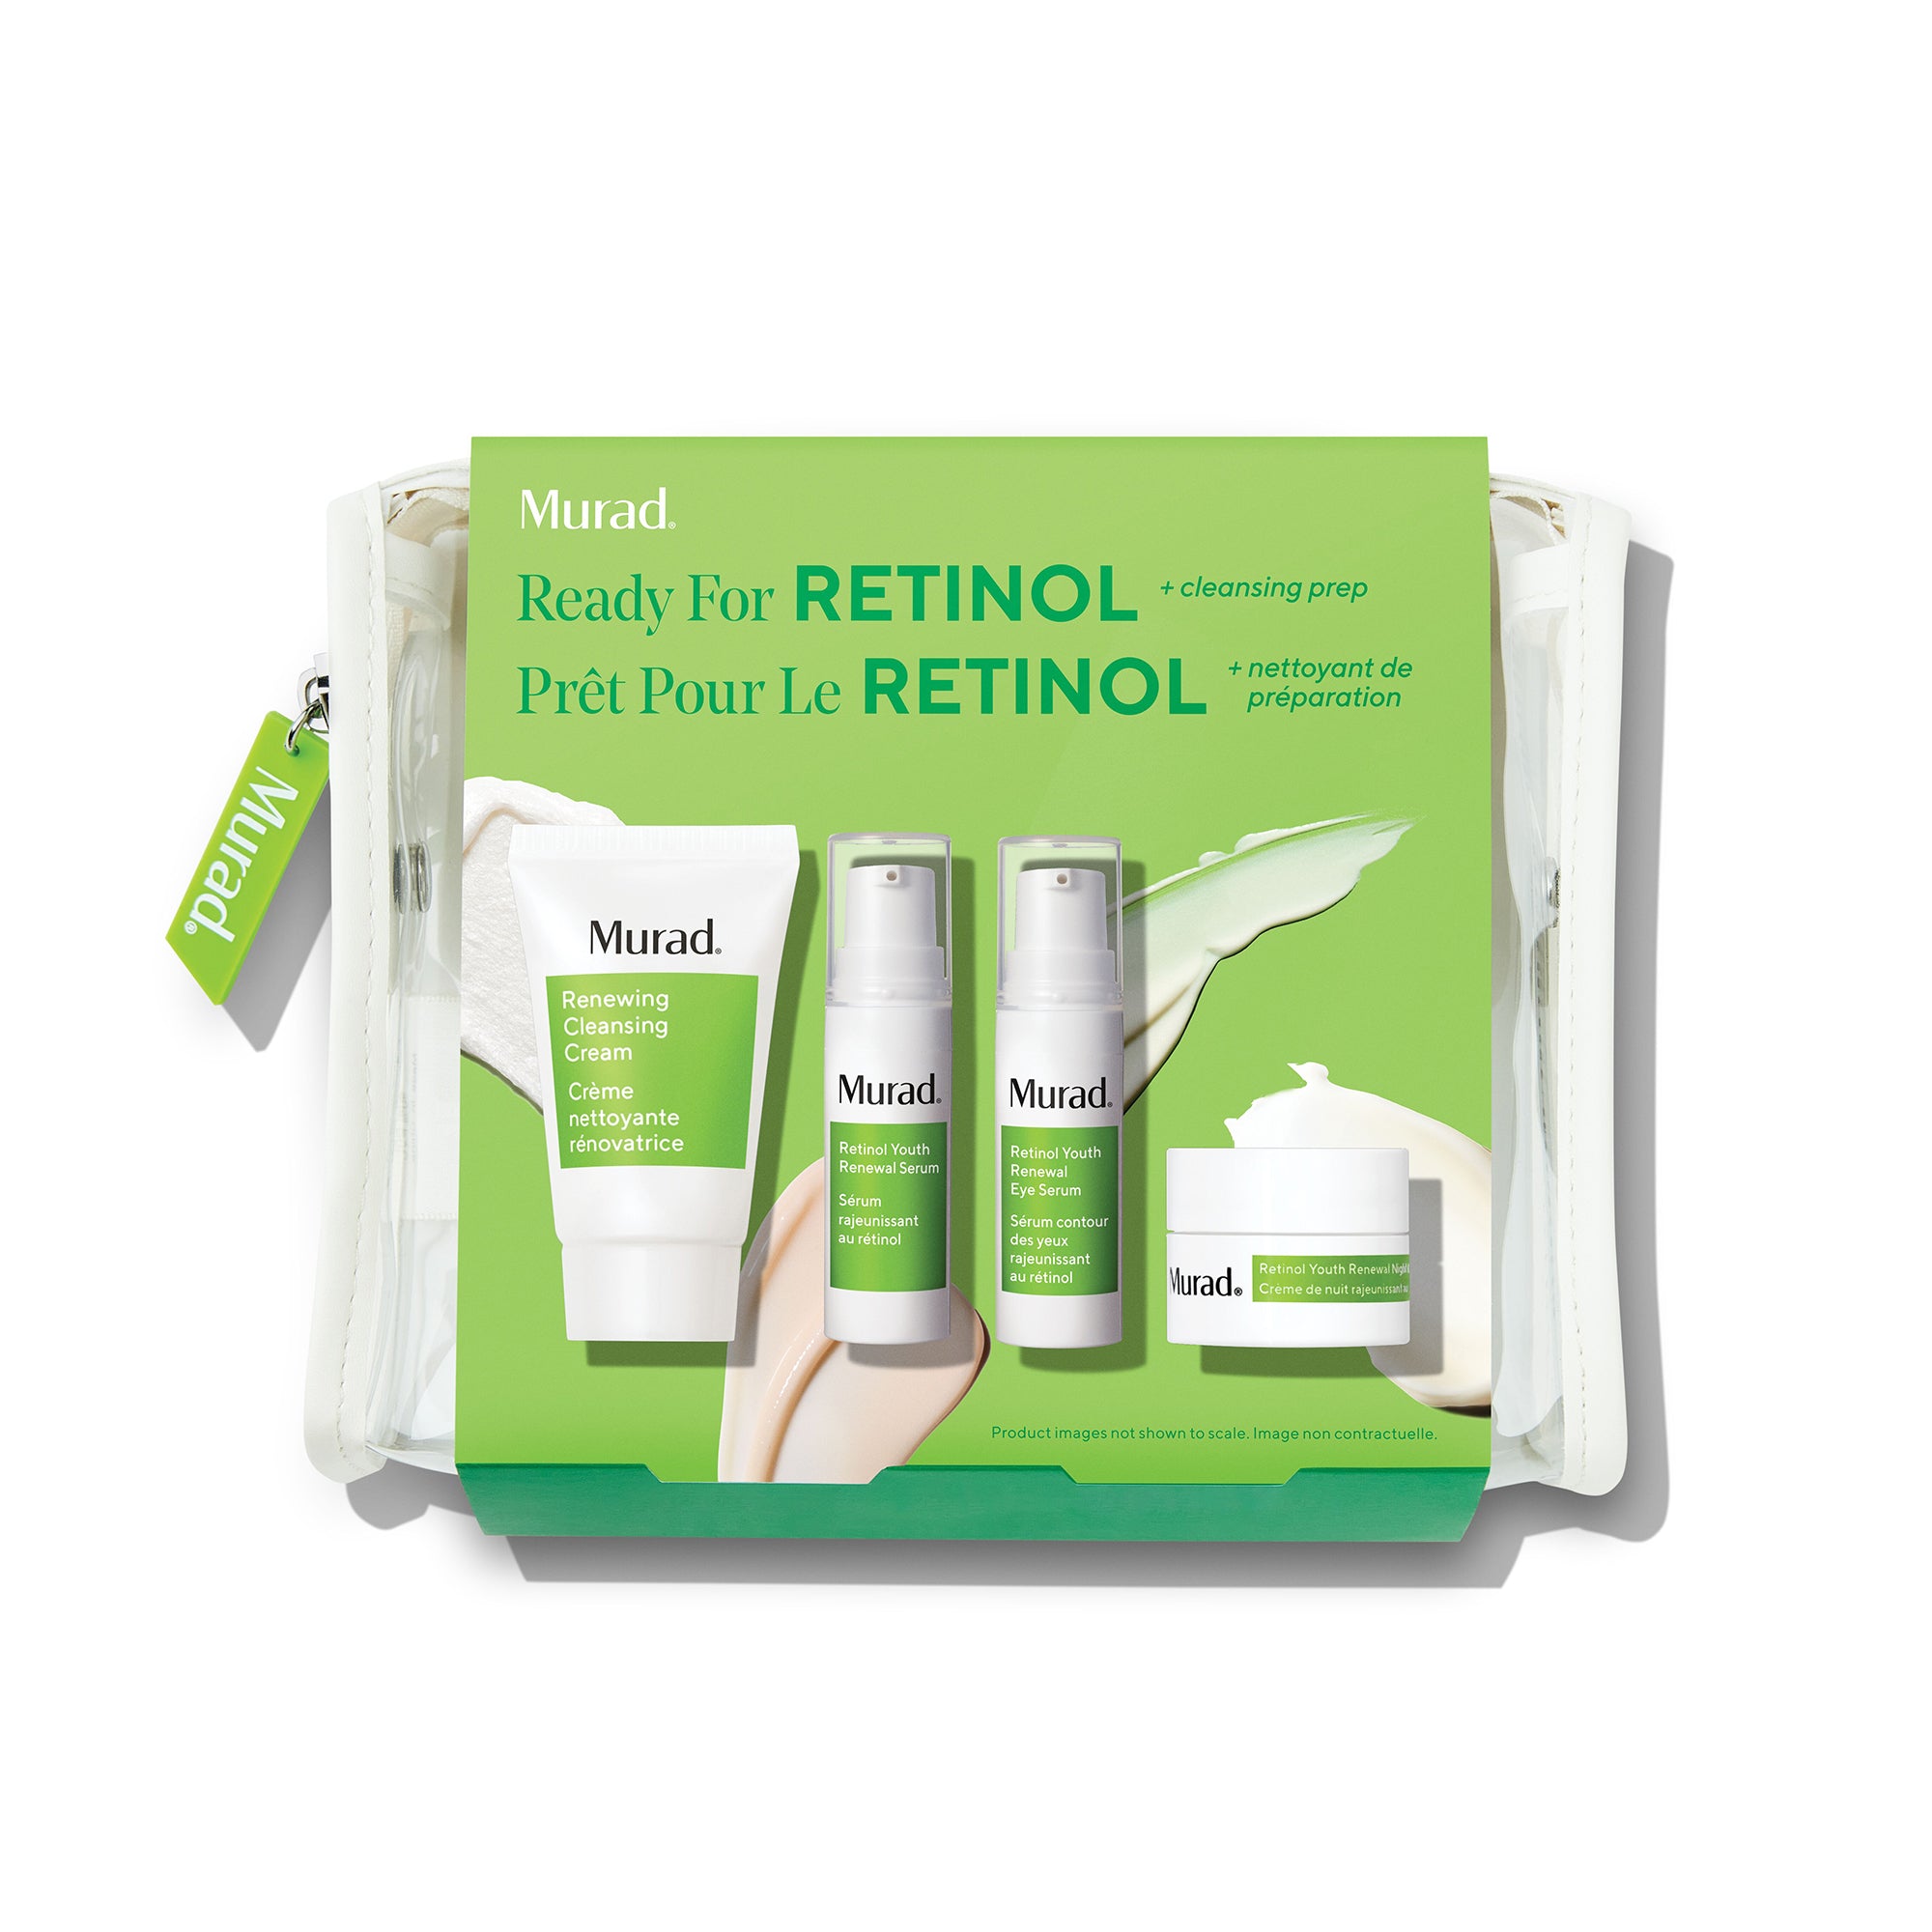 Ready for Retinol rollover image